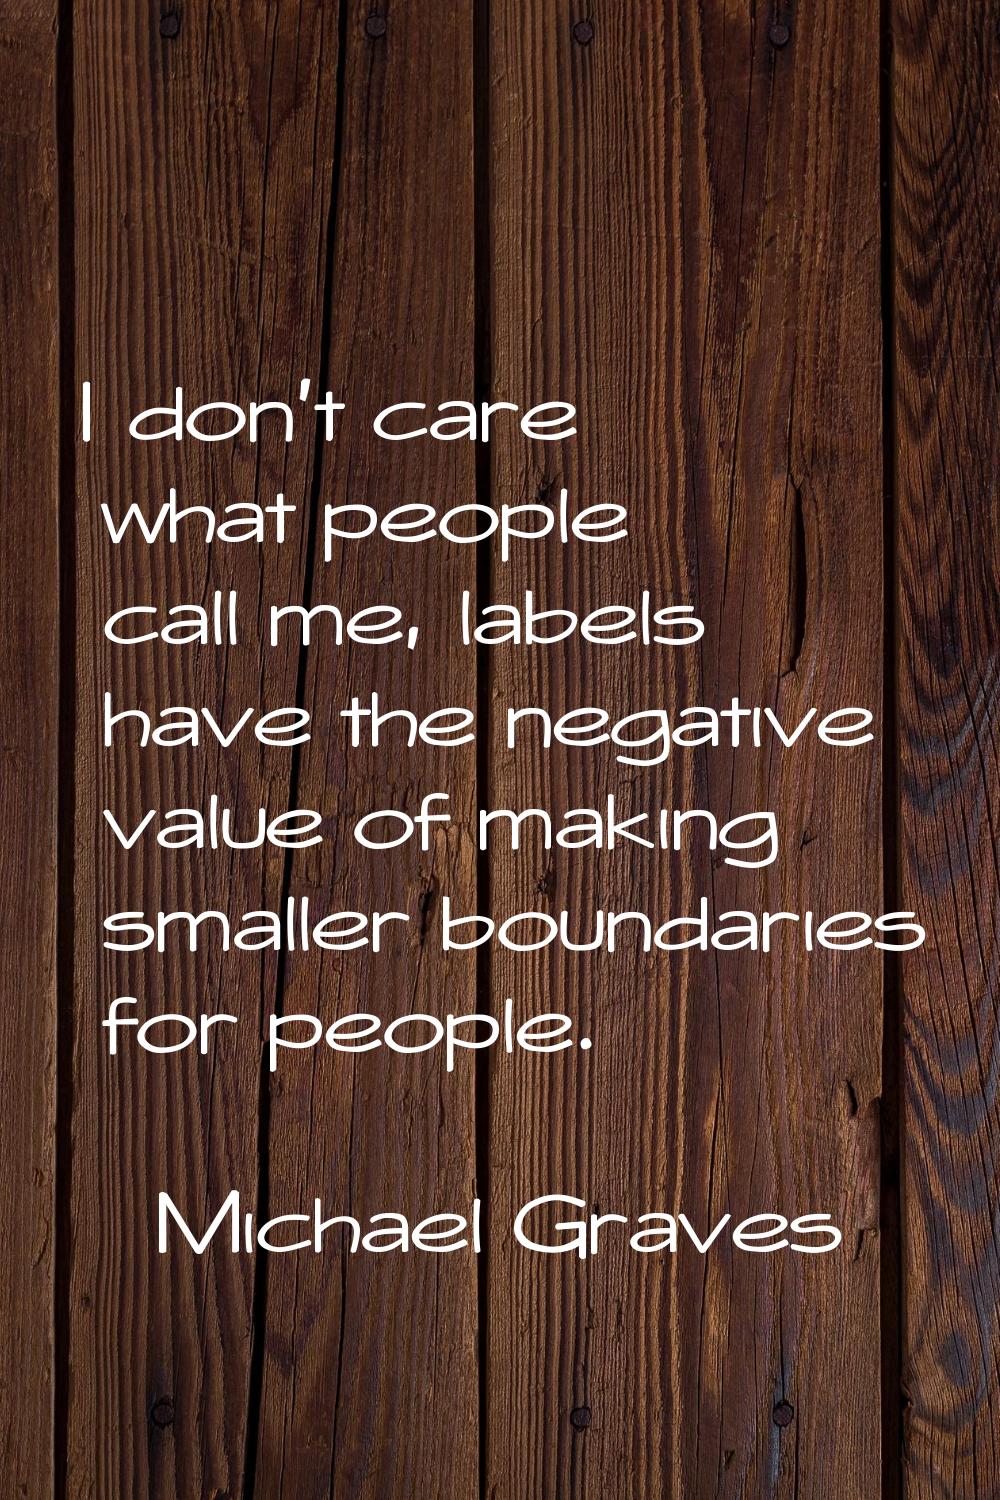 I don't care what people call me, labels have the negative value of making smaller boundaries for p